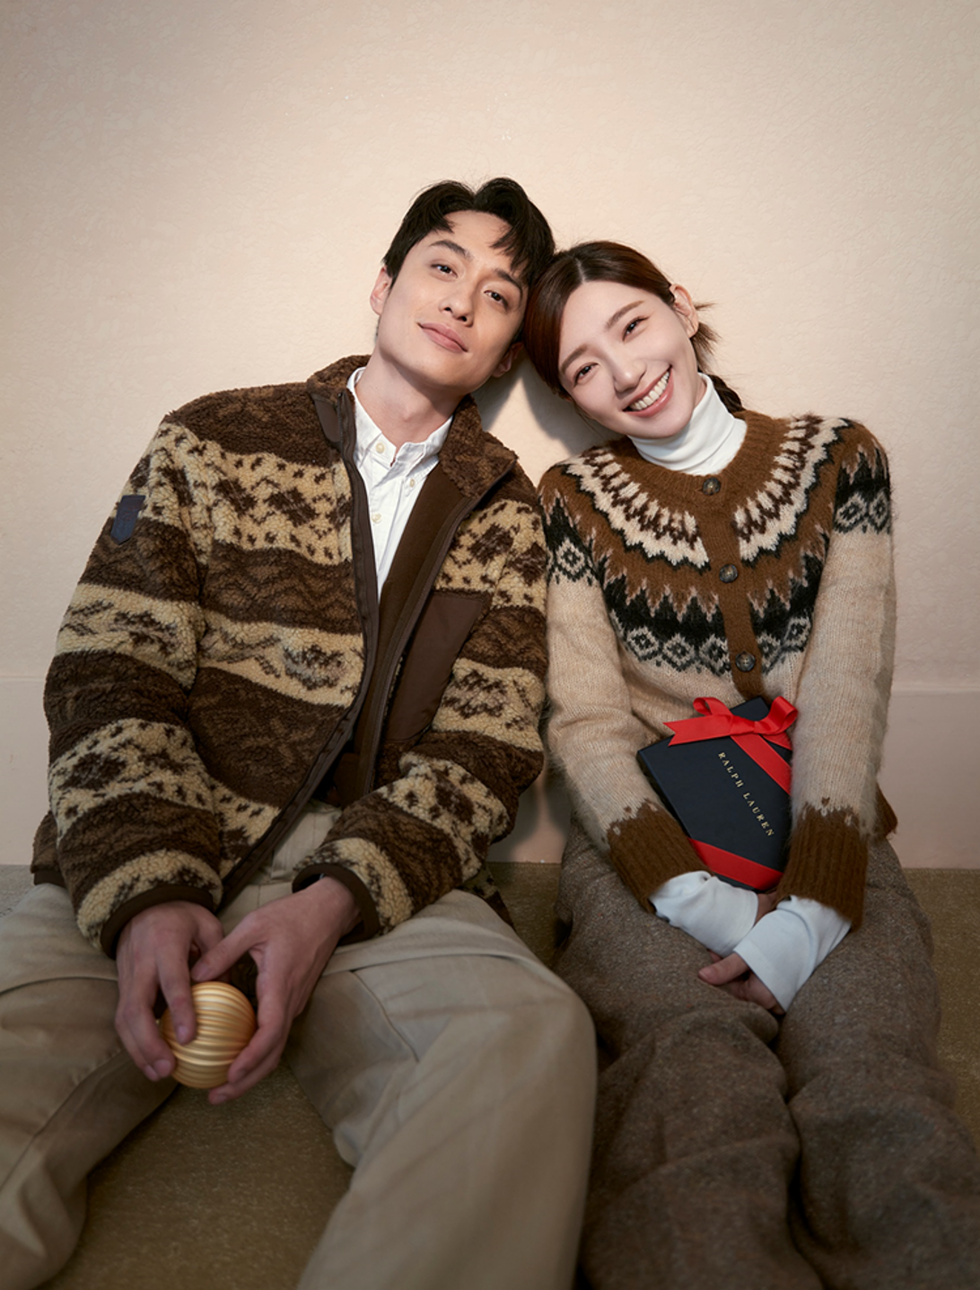 a man and woman sitting on a couch and smiling